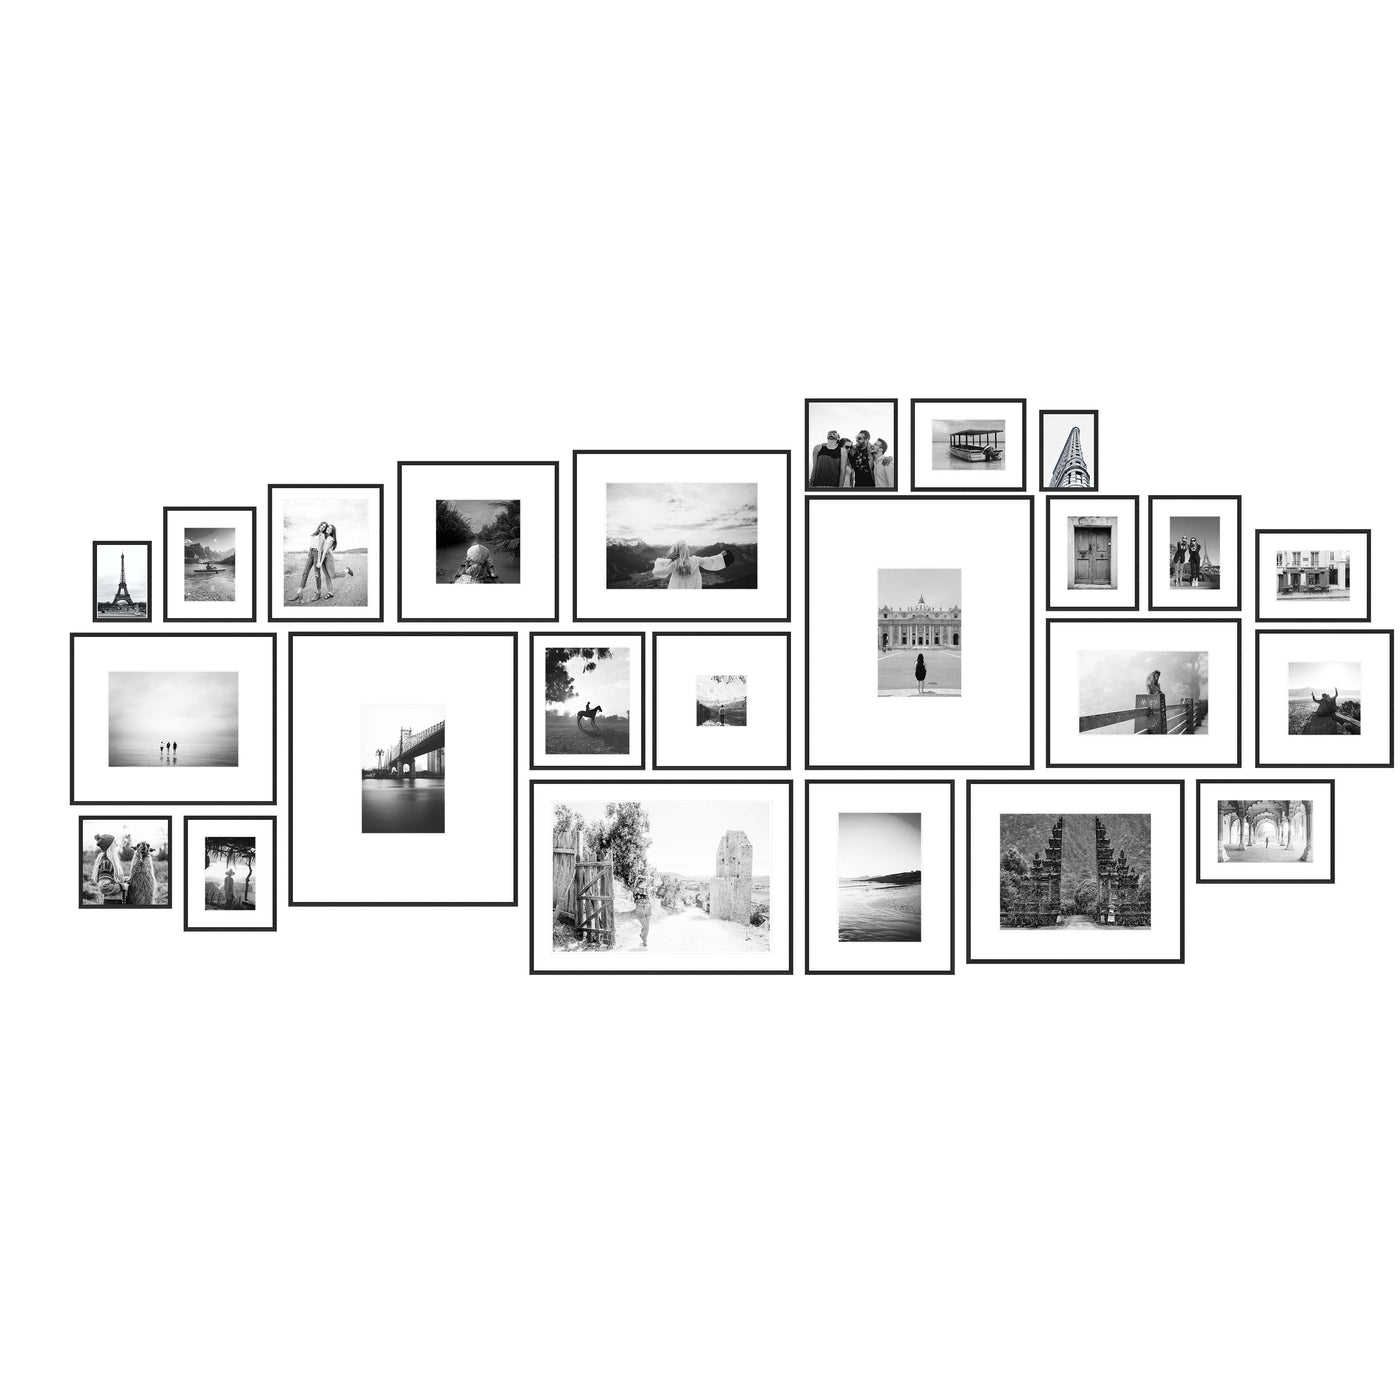 Gallery Walls Made Easy